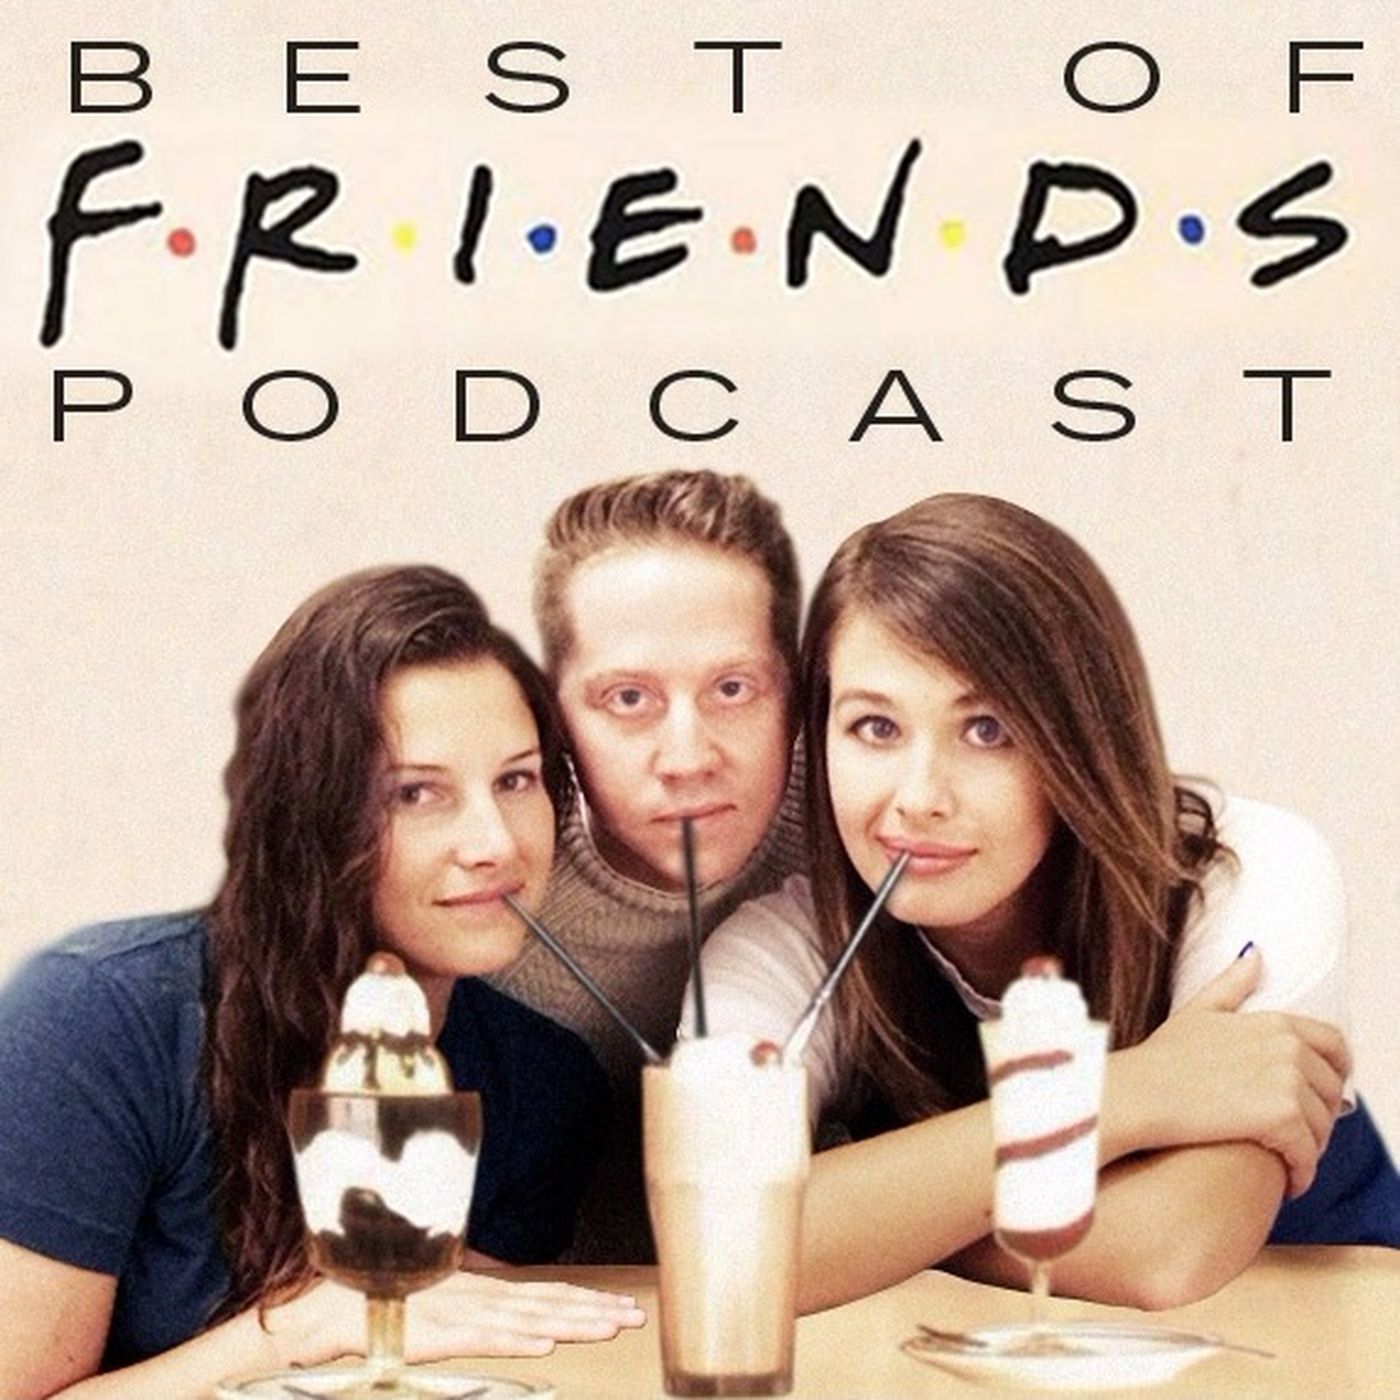 Episode 51: The One With No Hugging